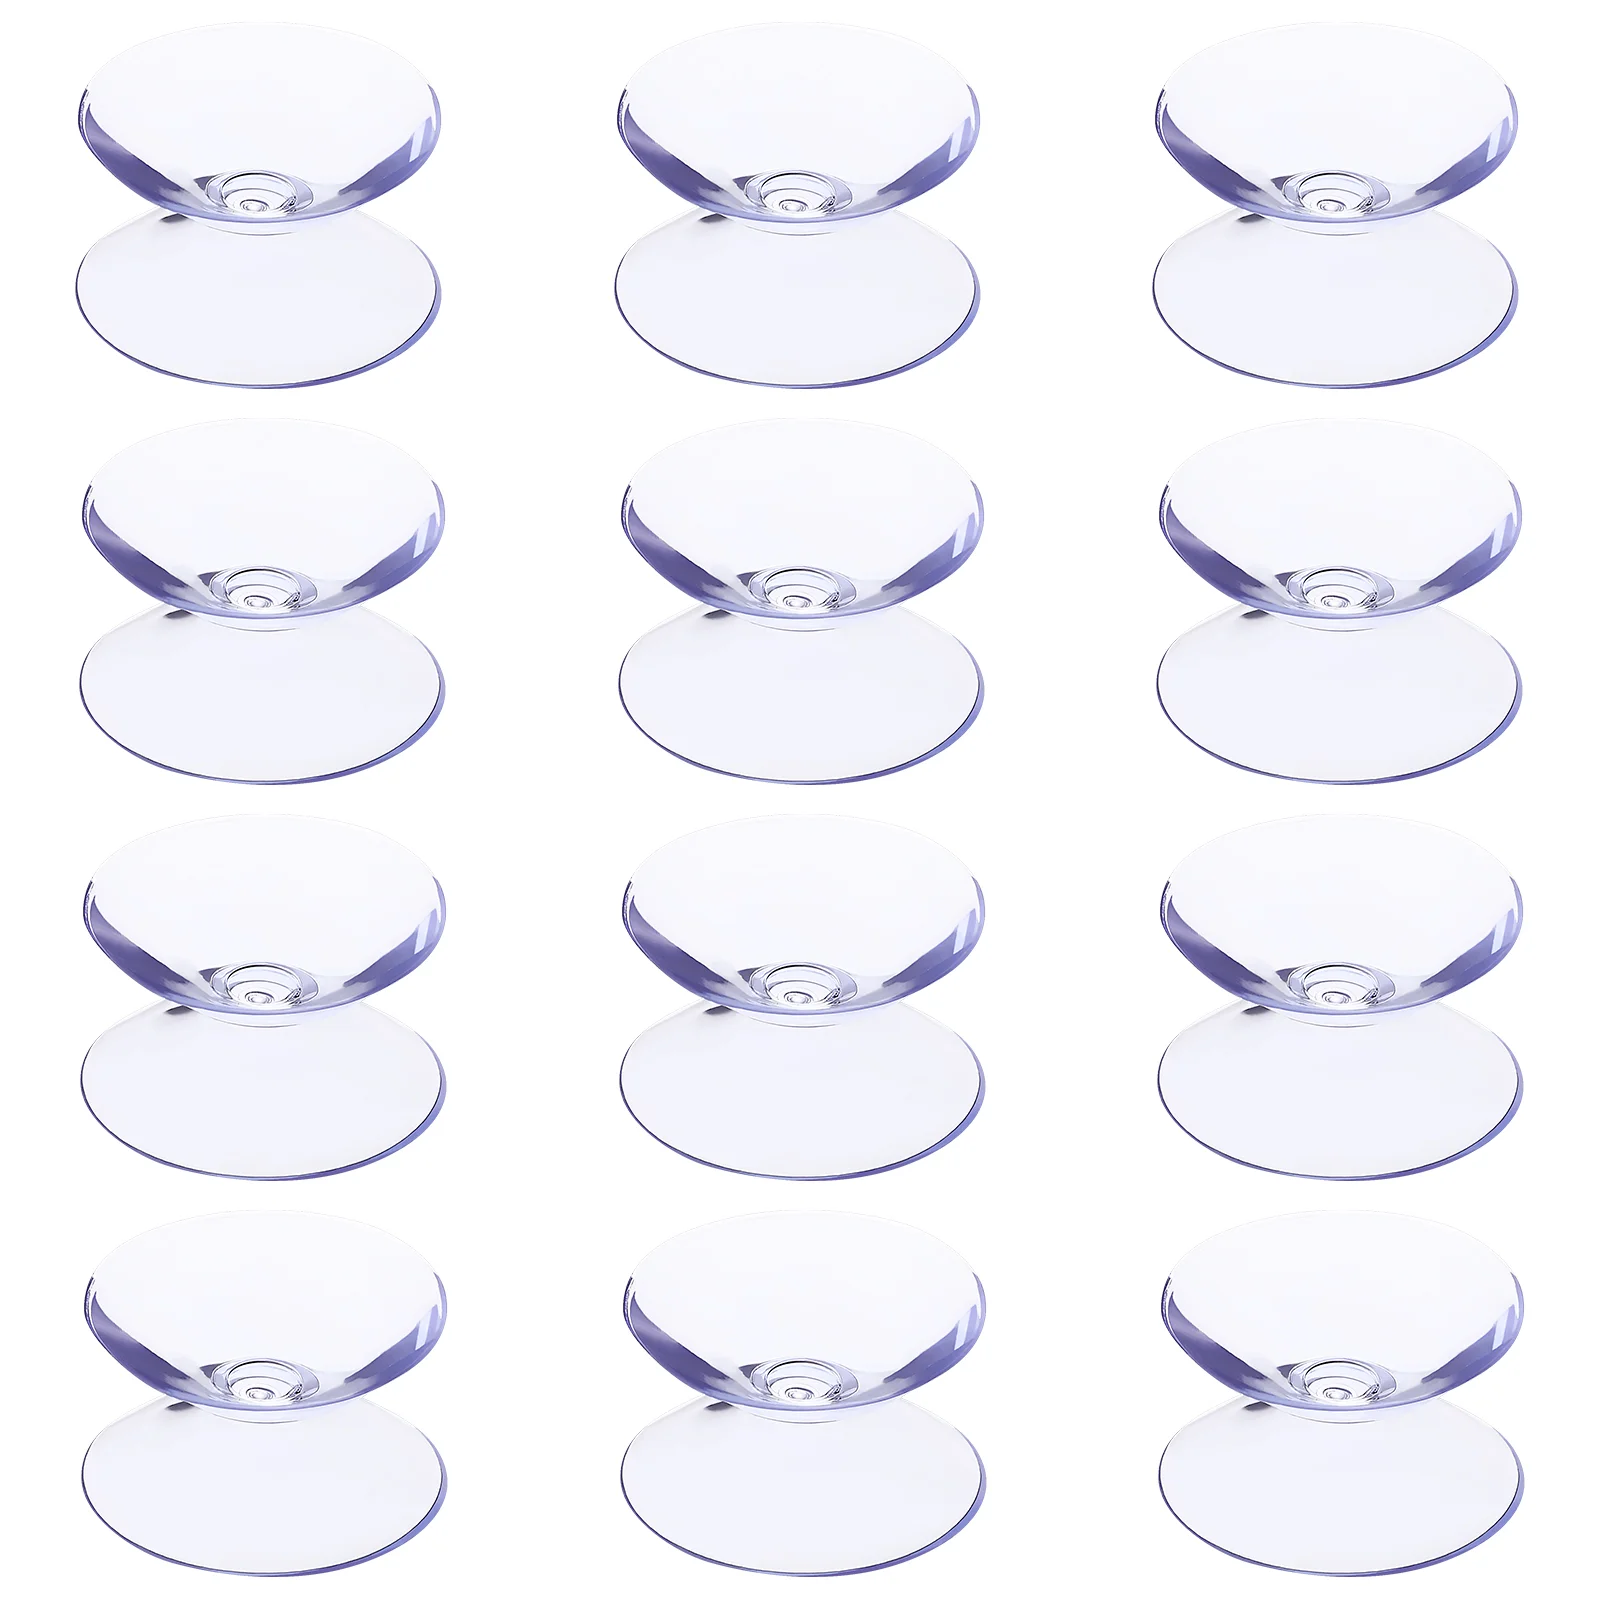 

Suction Cupstabledouble Pads Sided Cup Clearantisuckers Duty Heavysucker Spacers Mini Spacer Silicone Nonslip Hooks Pad Window